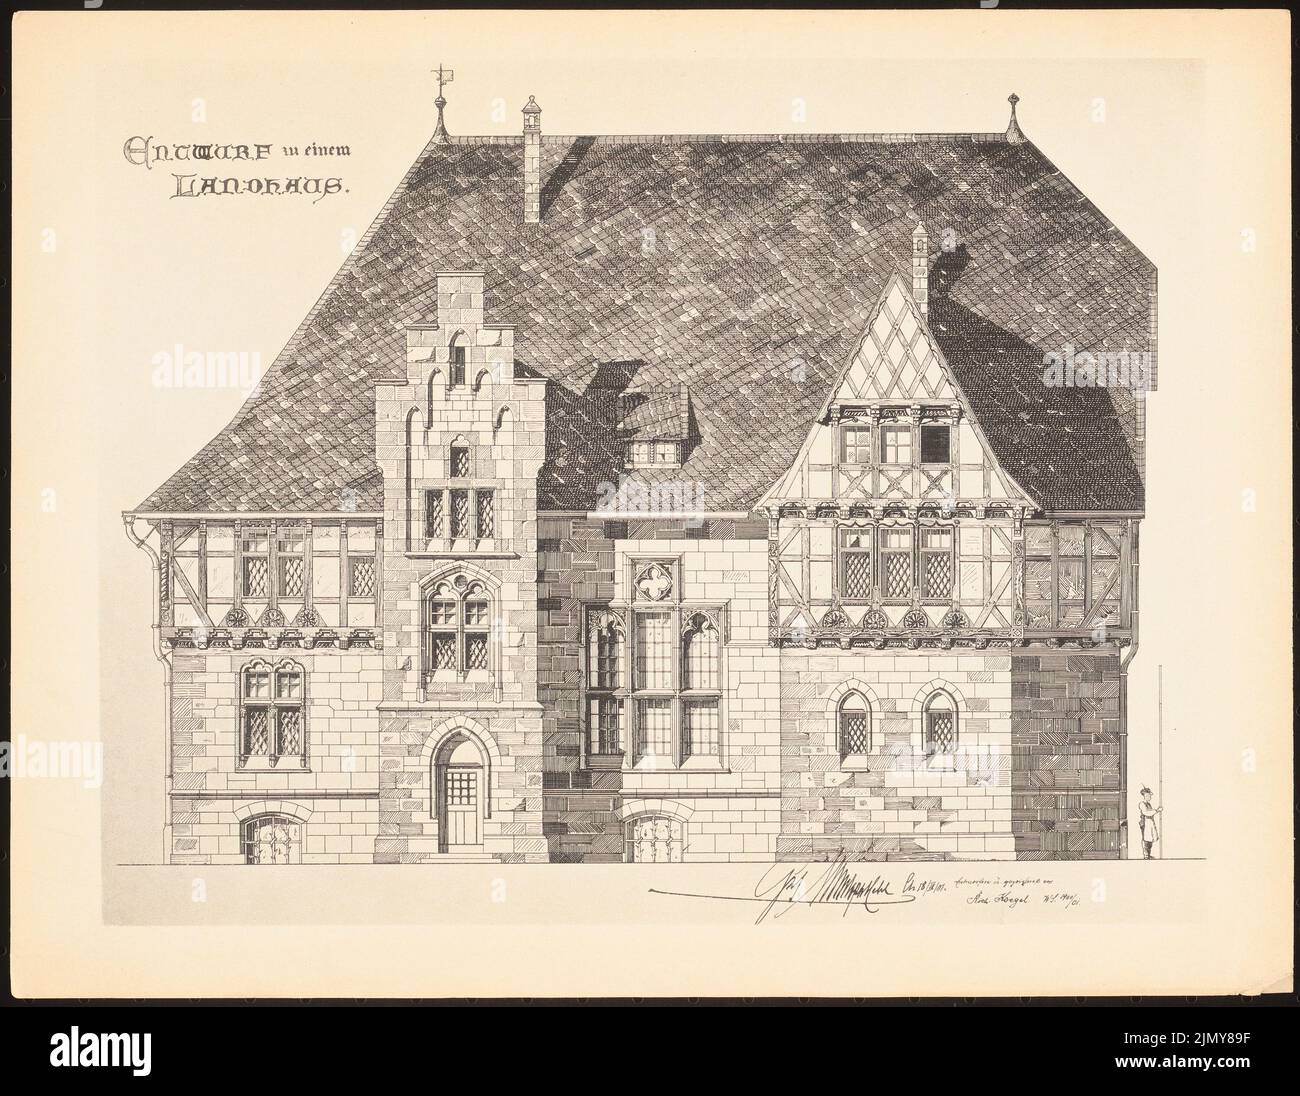 Koegel Richard, country house. (From: Prints of seminar works by the Royal Technical University of Berlin, Vol. II) (March 18, 1901): View. Print on paper, 25.4 x 32.8 cm (including scan edges) Stock Photo